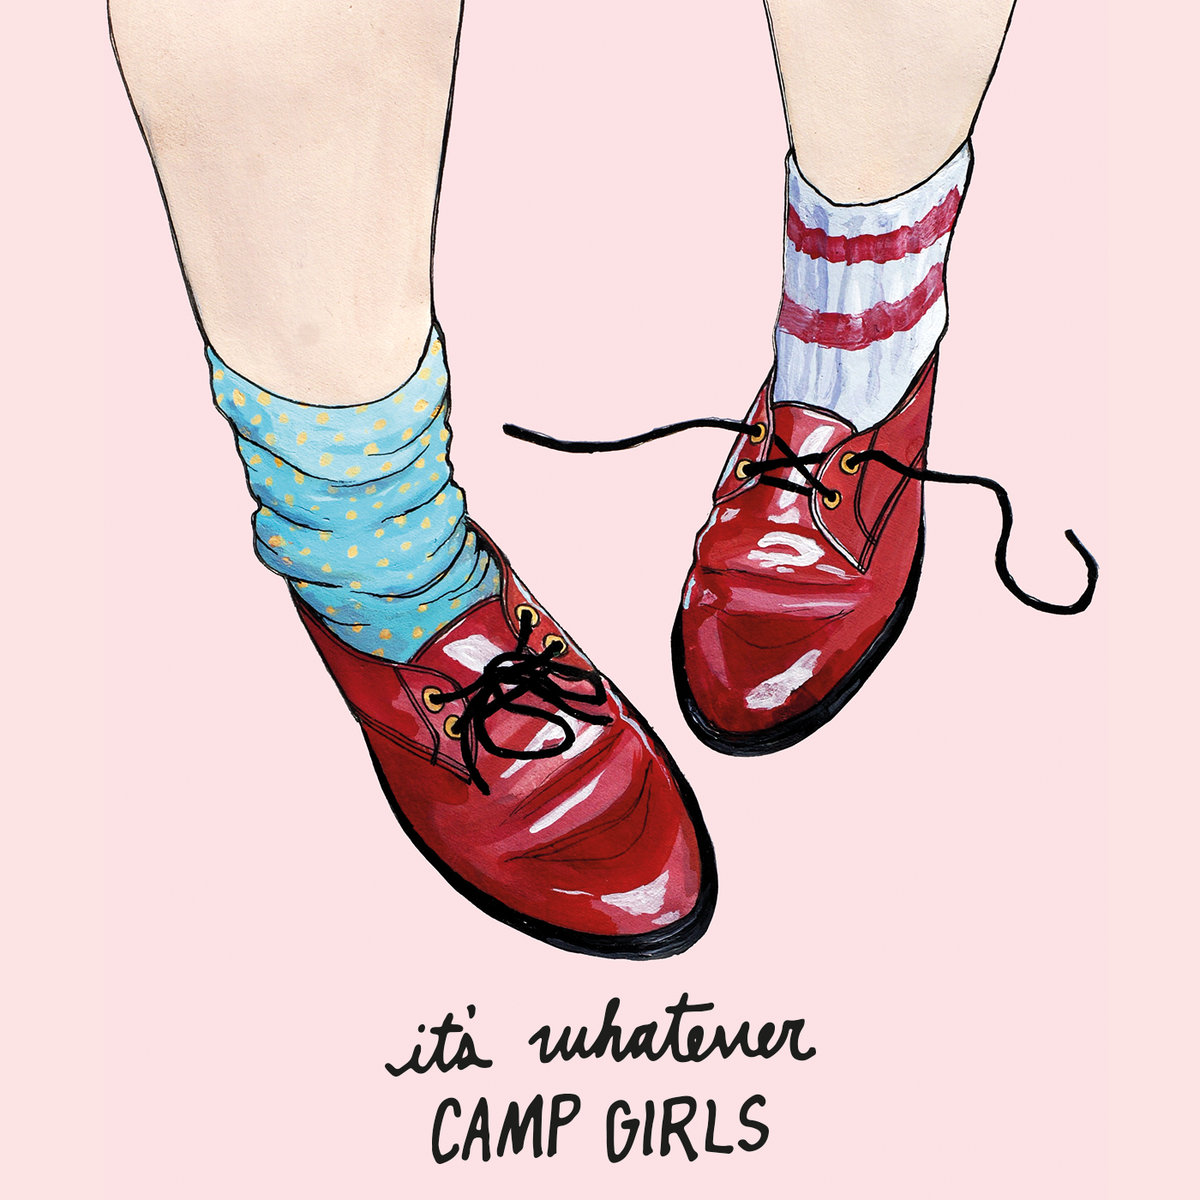 Camp Girls EP It’s Whatever is here!